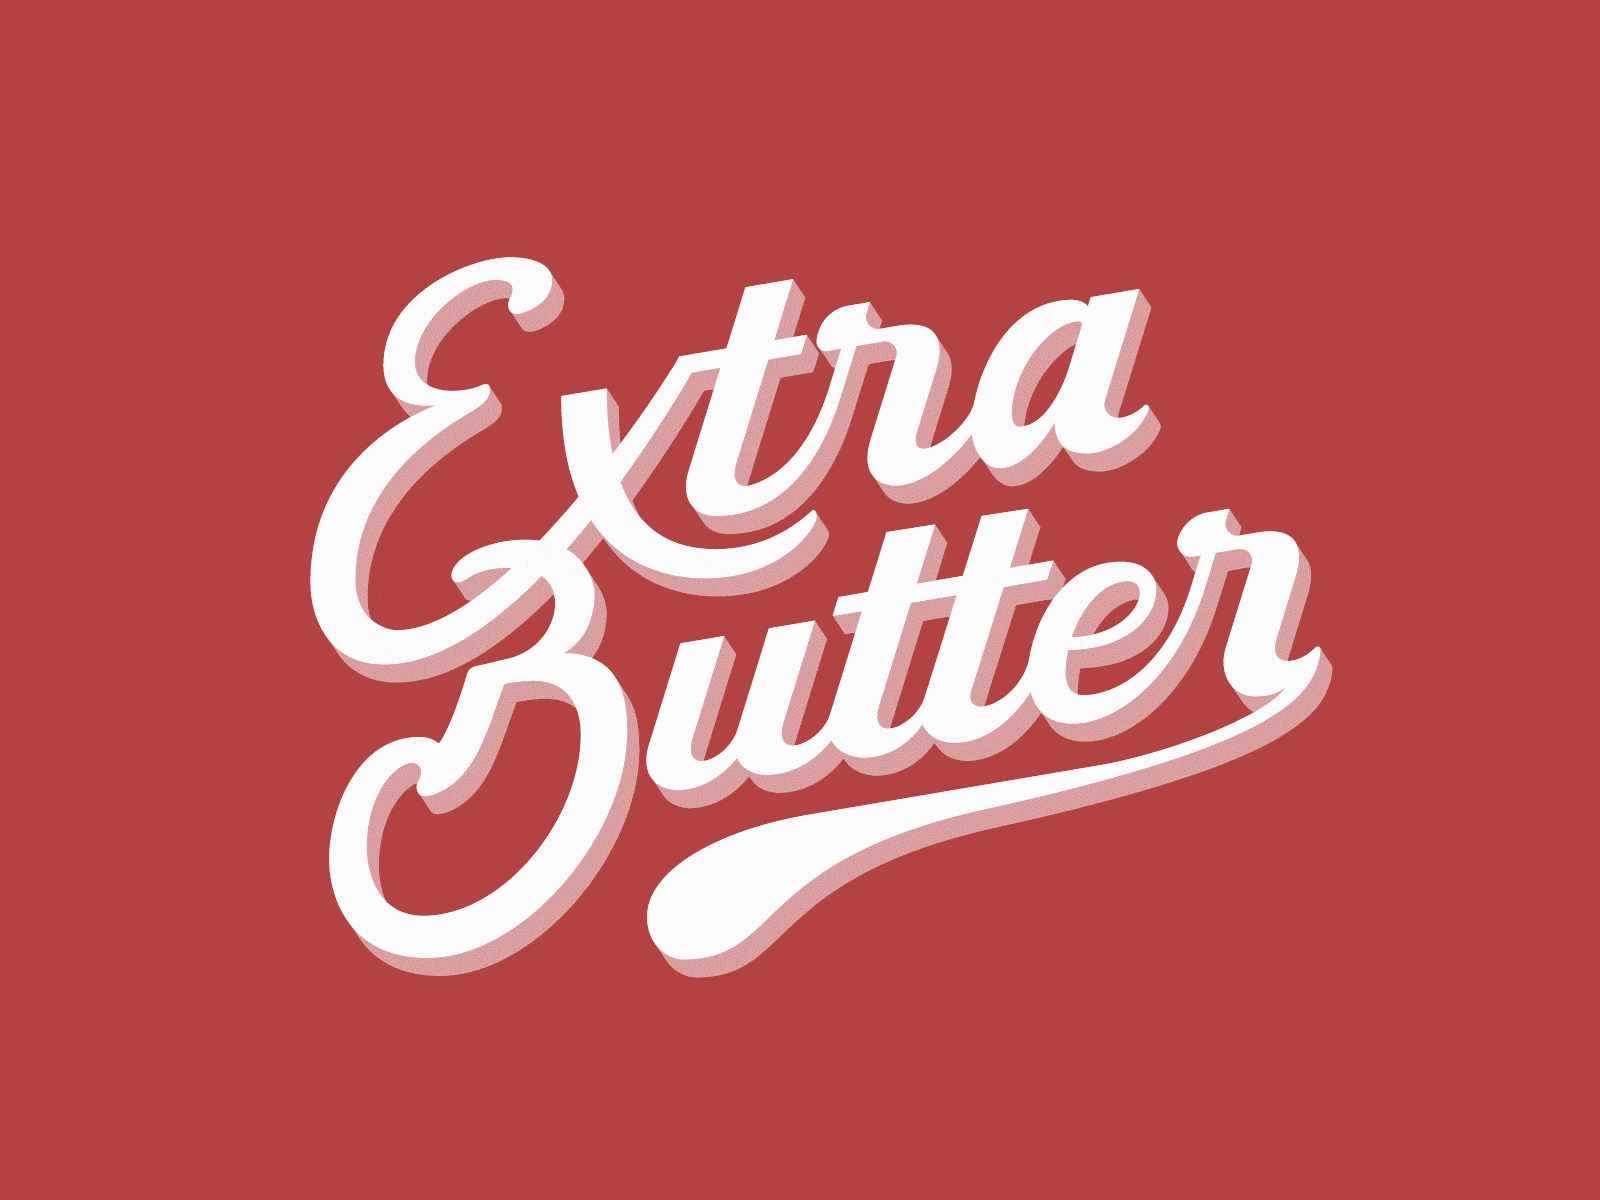 Extra Butter branding design graphicdesign letter lettering lettering art lettering logo logo logotype logotypedesign type typedesign typographic typography vector